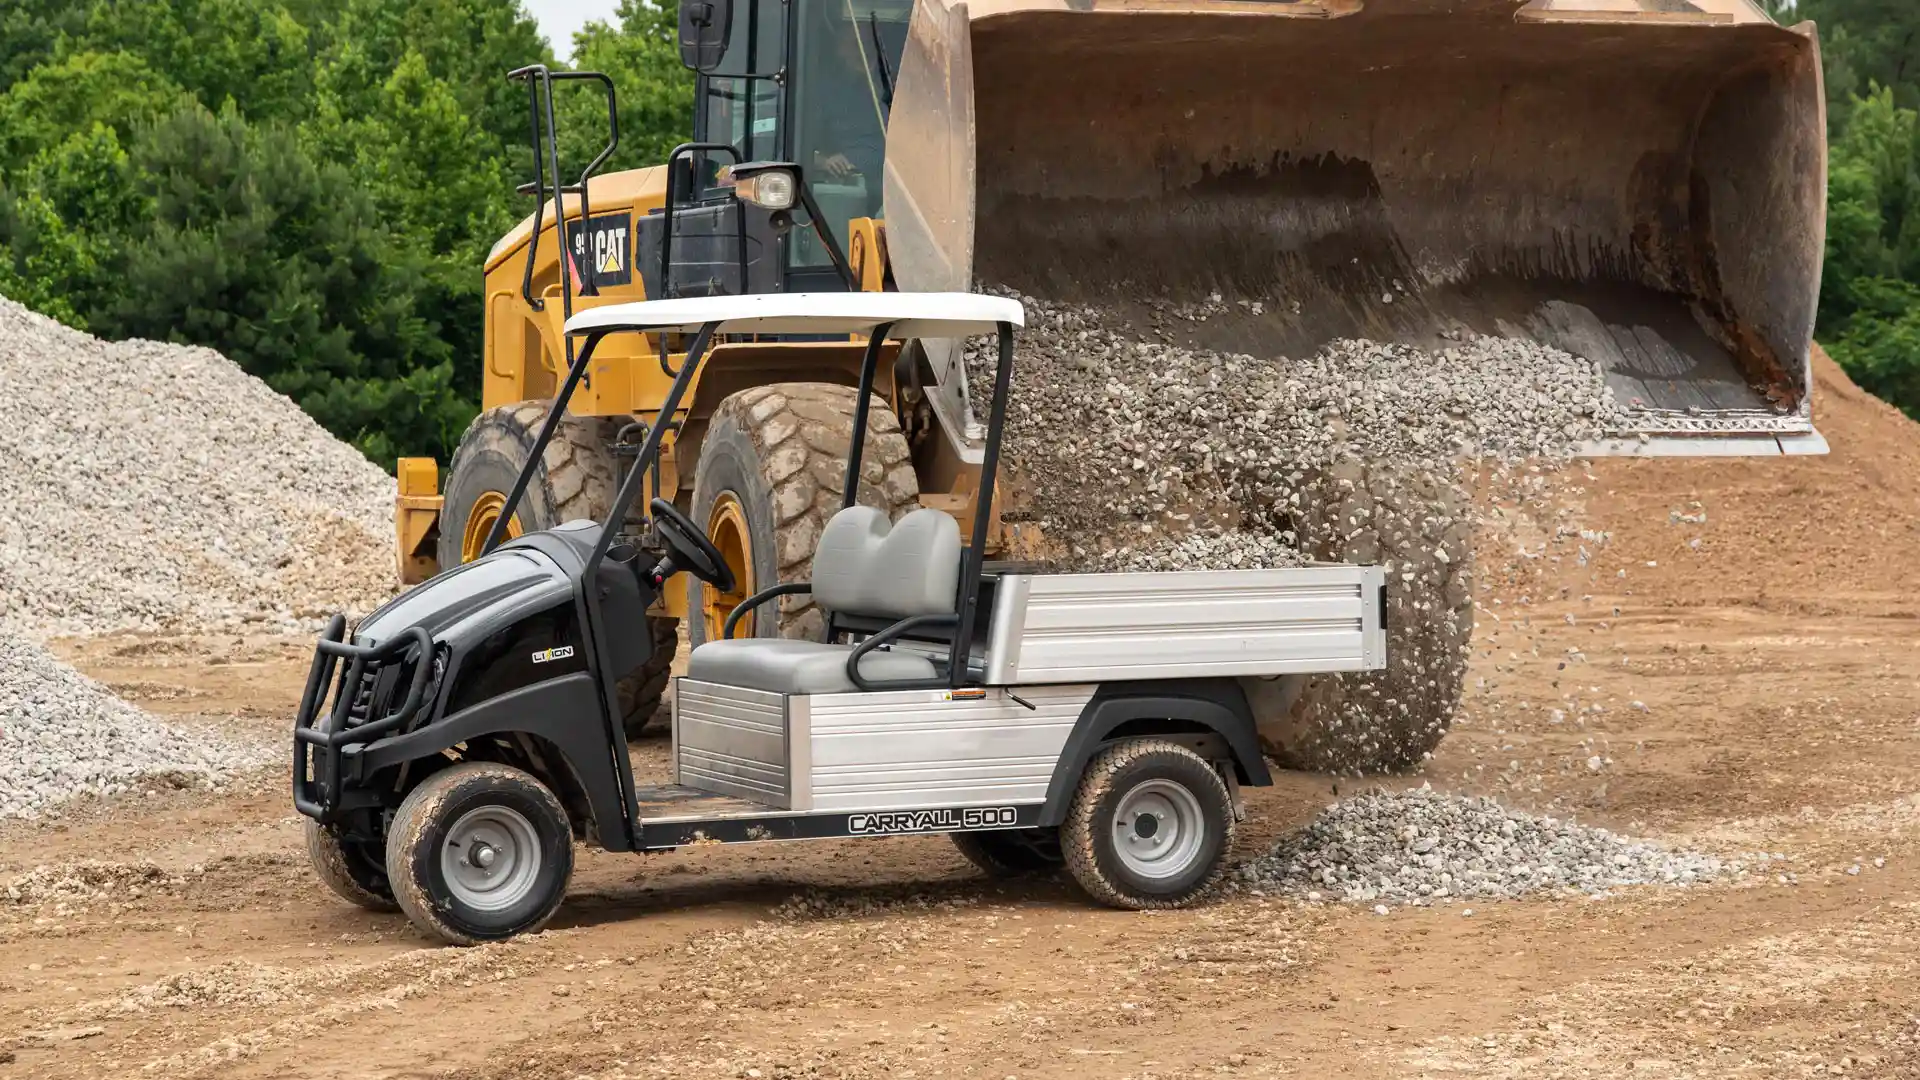 Lithium Ion powered utility vehicle at rock quarry